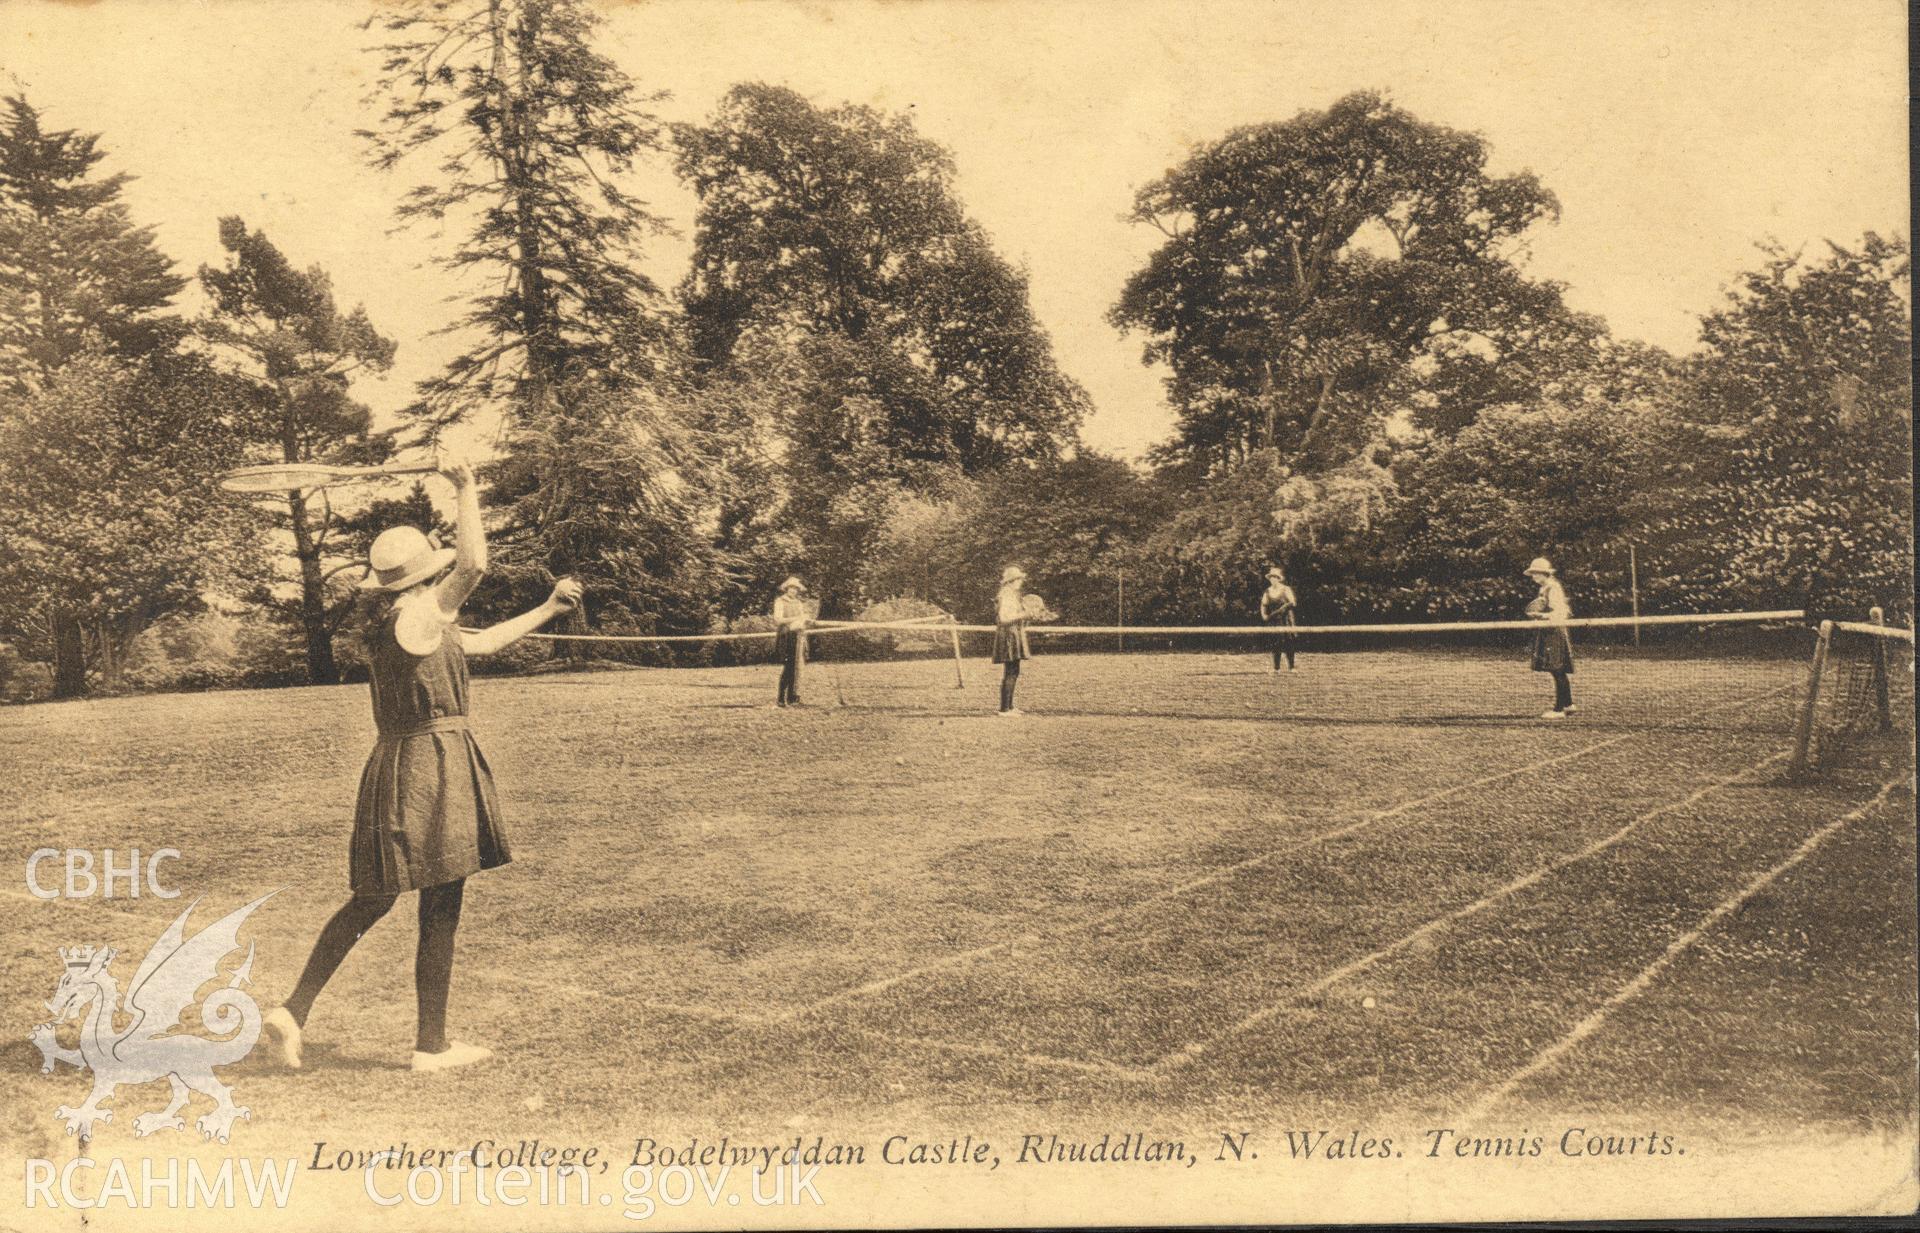 Digitised postcard image of Bodelwyddan Castle / Lowther College Garden (with girls playing tennis), P.A. Buchanan & Co. Produced by Parks and Gardens Data Services, from an original item in the Peter Davis Collection at Parks and Gardens UK. We hold only web-resolution images of this collection, suitable for viewing on screen and for research purposes only. We do not hold the original images, or publication quality scans.